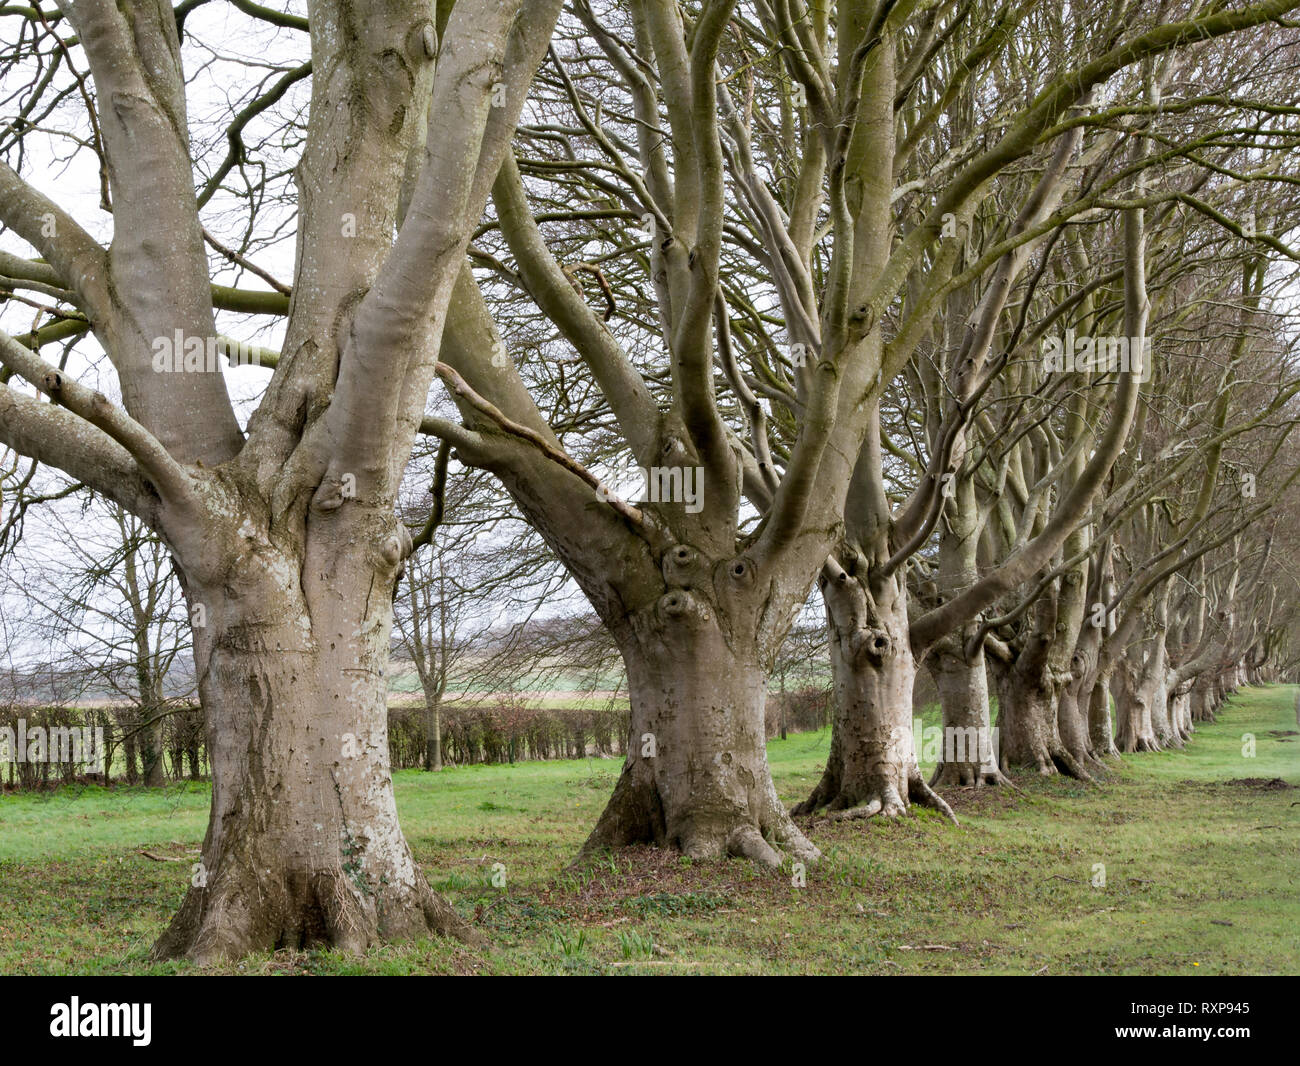 Beech tree lined Road, Kingston Lacy Estate, Dorset, UK Banque D'Images